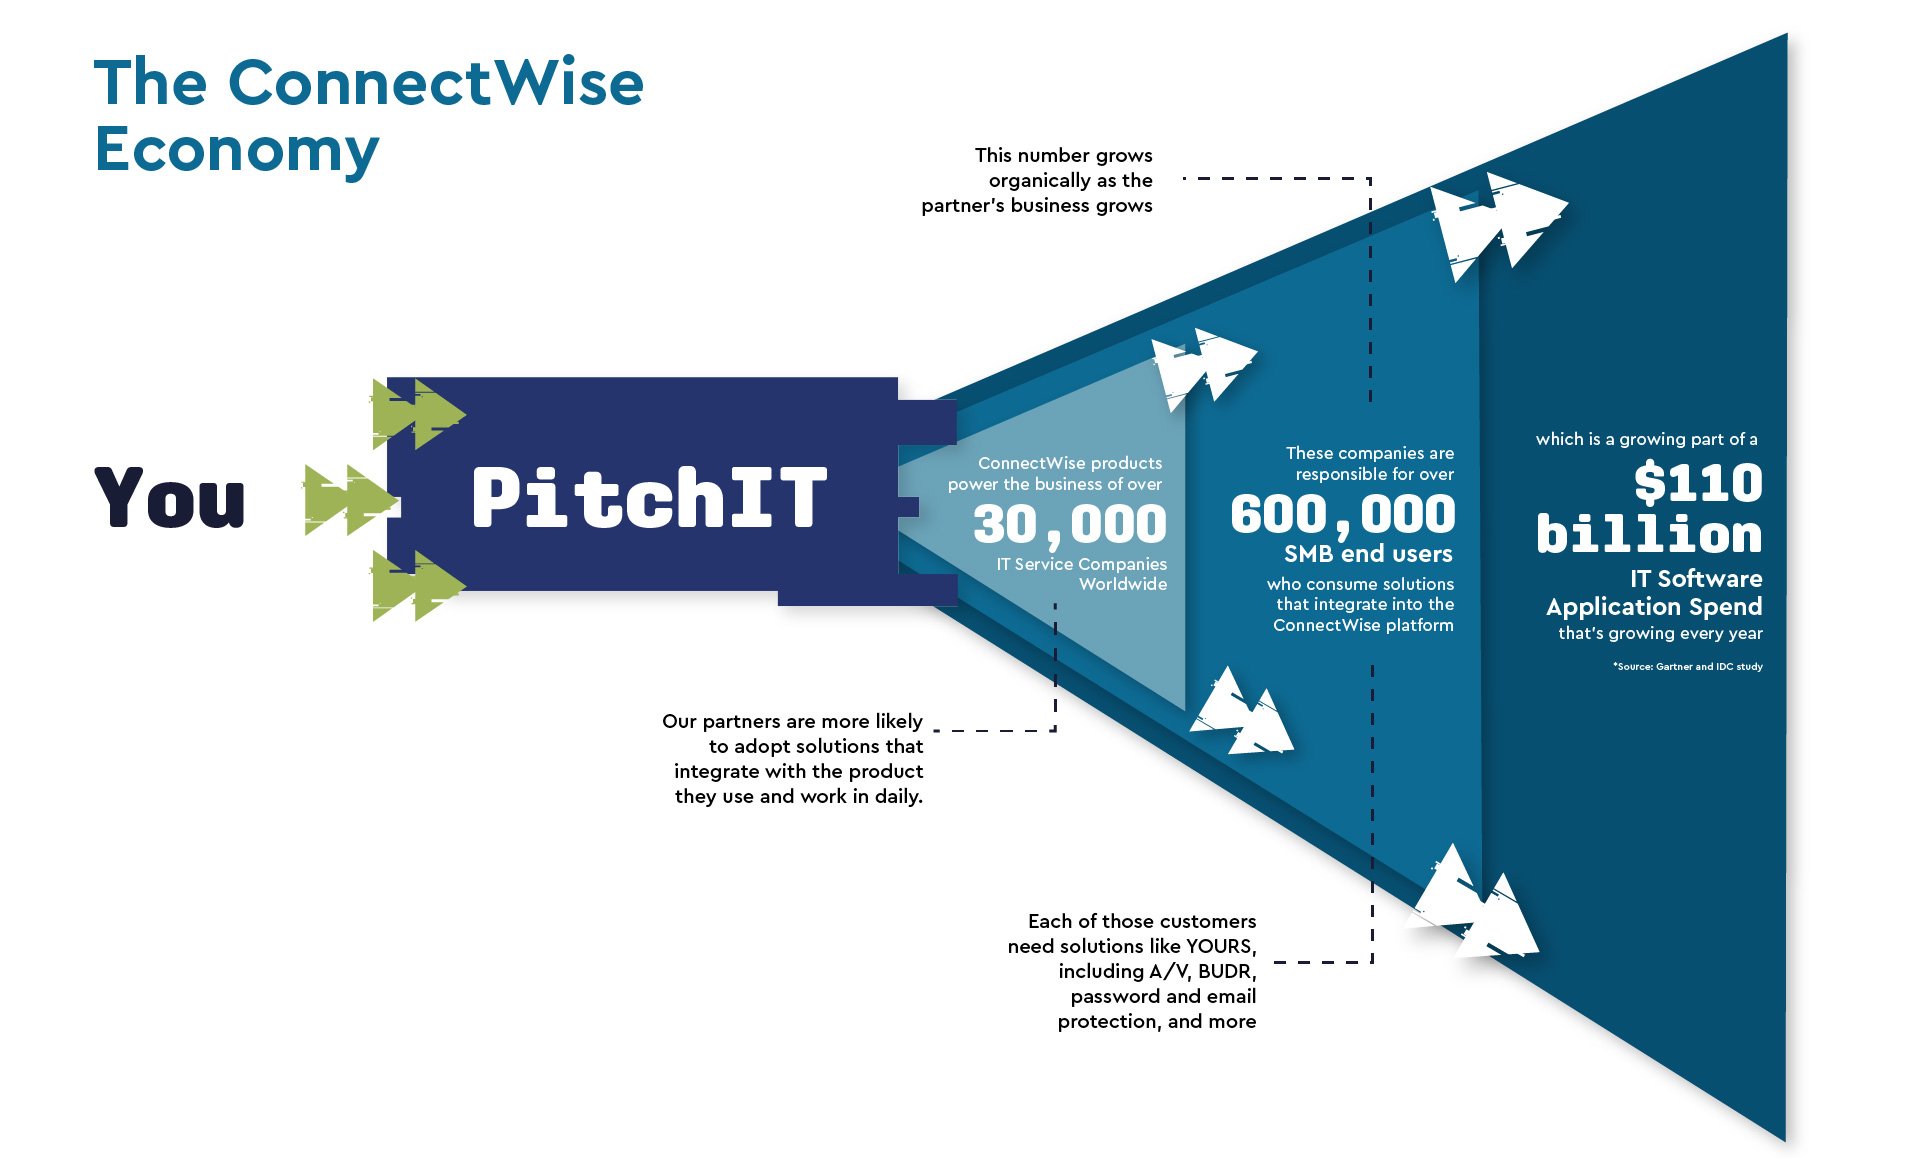 TheConnectWiseEconomy-PitchIT.jpg